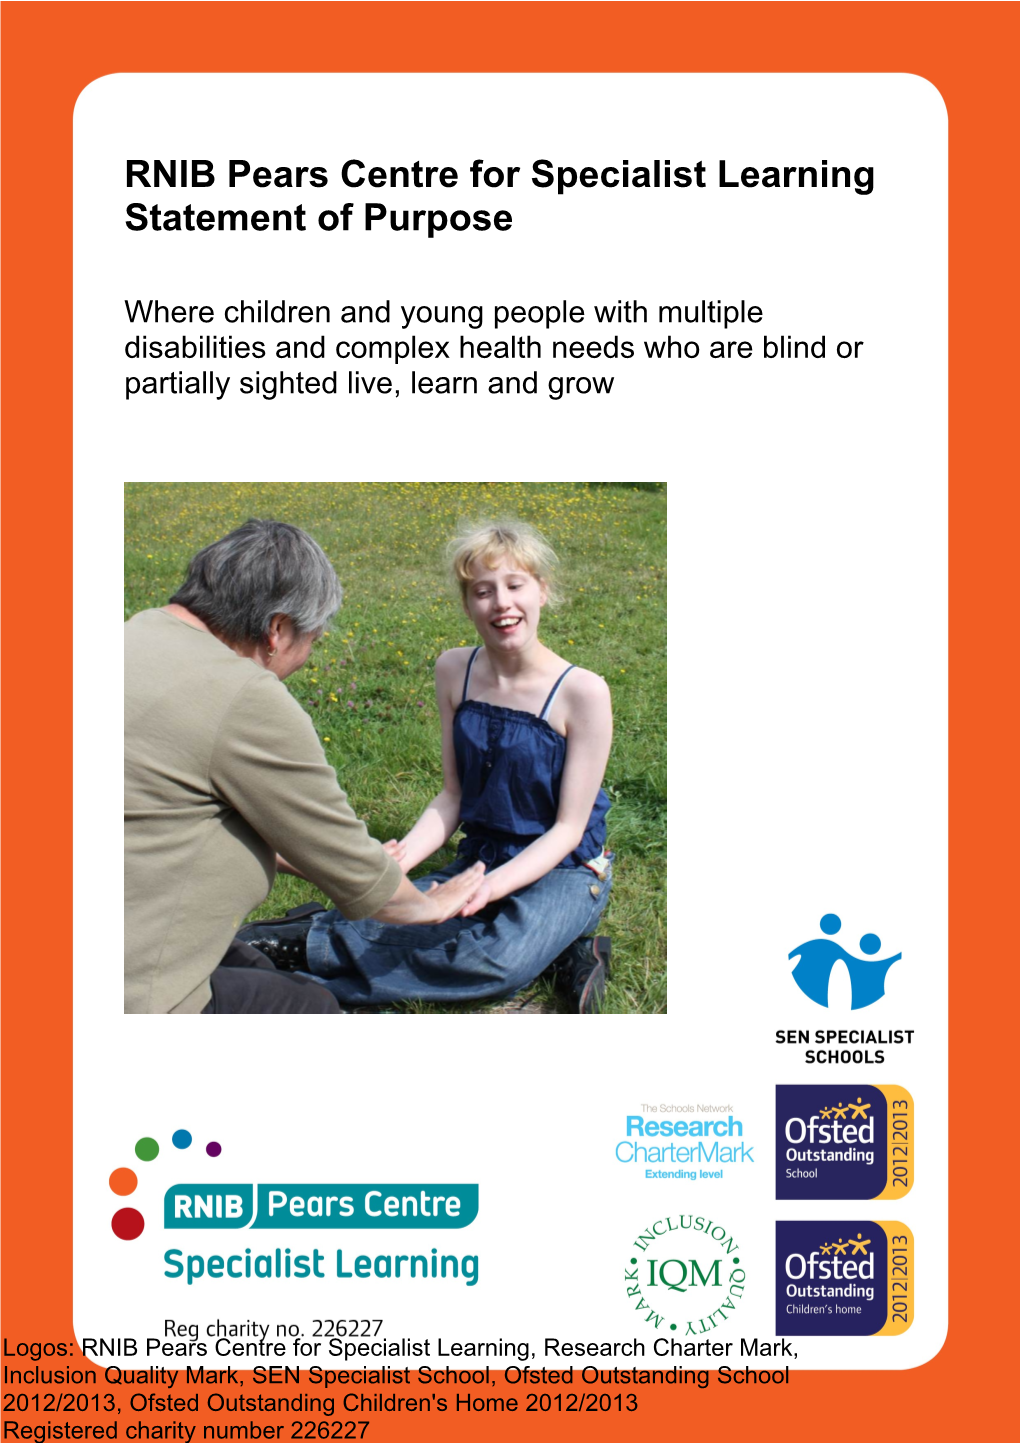 RNIB Pears Centre for Specialist Learning Statement of Purpose